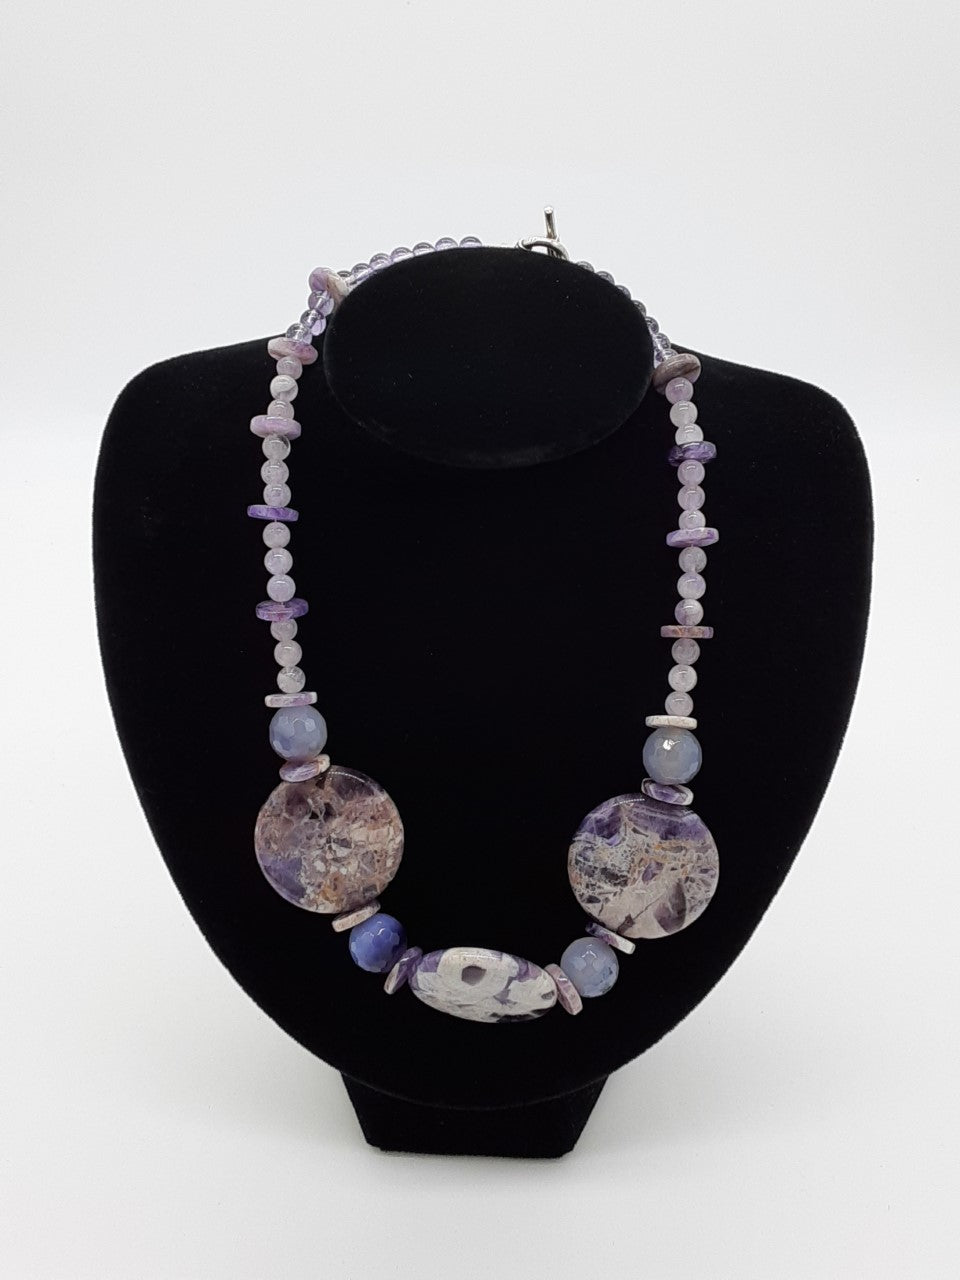 necklace made with purple quartz. Mostly round beads with a a few disks. The center has three large flat beads of purple and white pattern